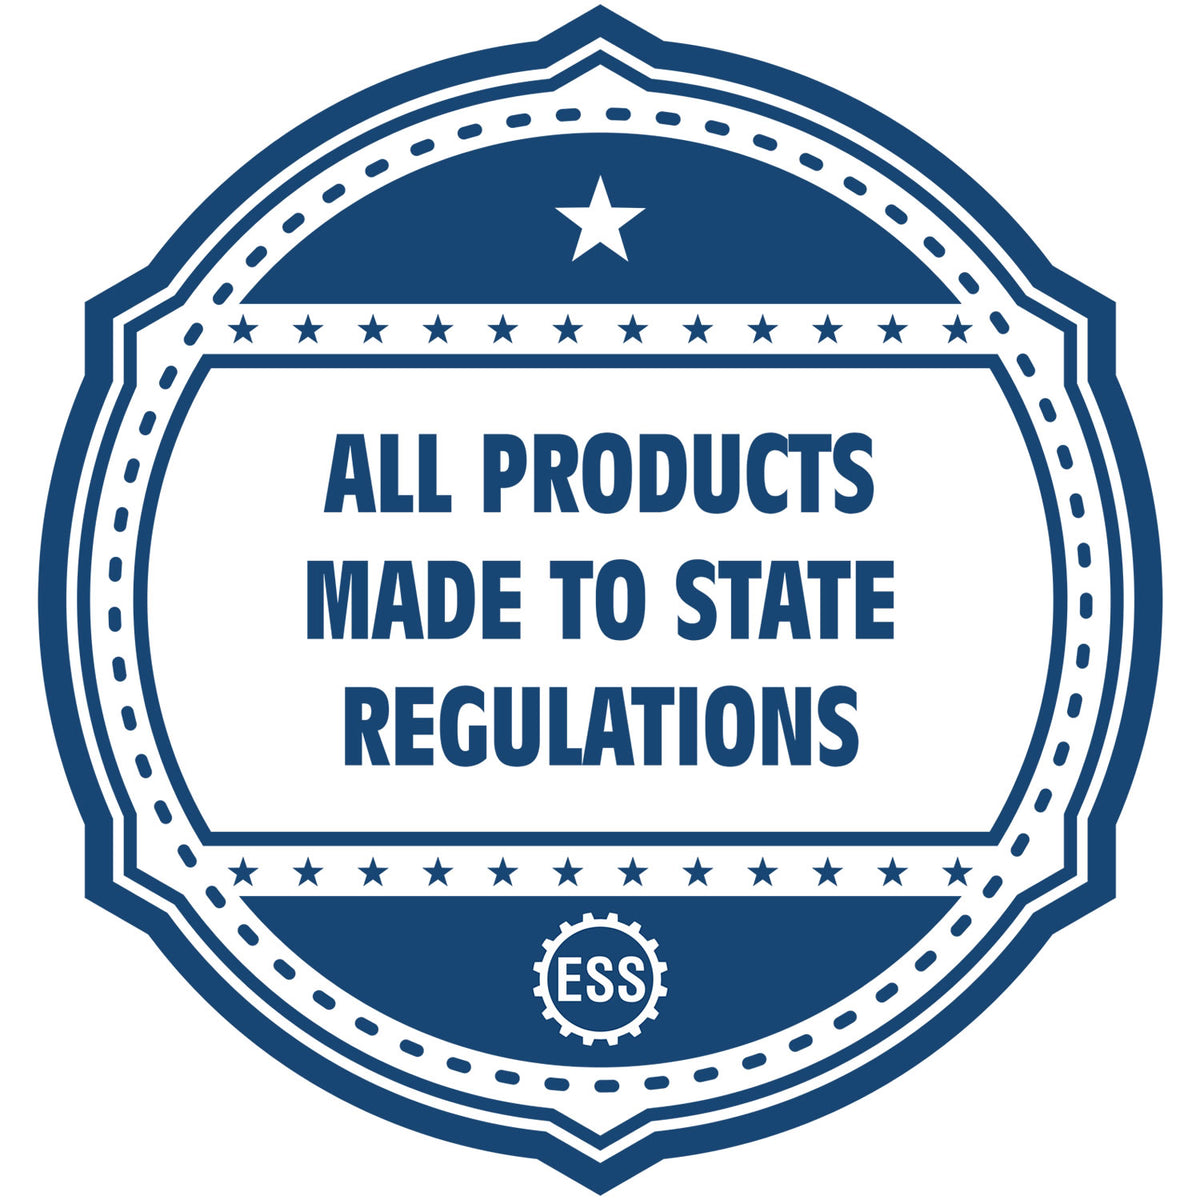 An icon or badge element for the Slim Pre-Inked South Carolina Professional Engineer Seal Stamp showing that this product is made in compliance with state regulations.